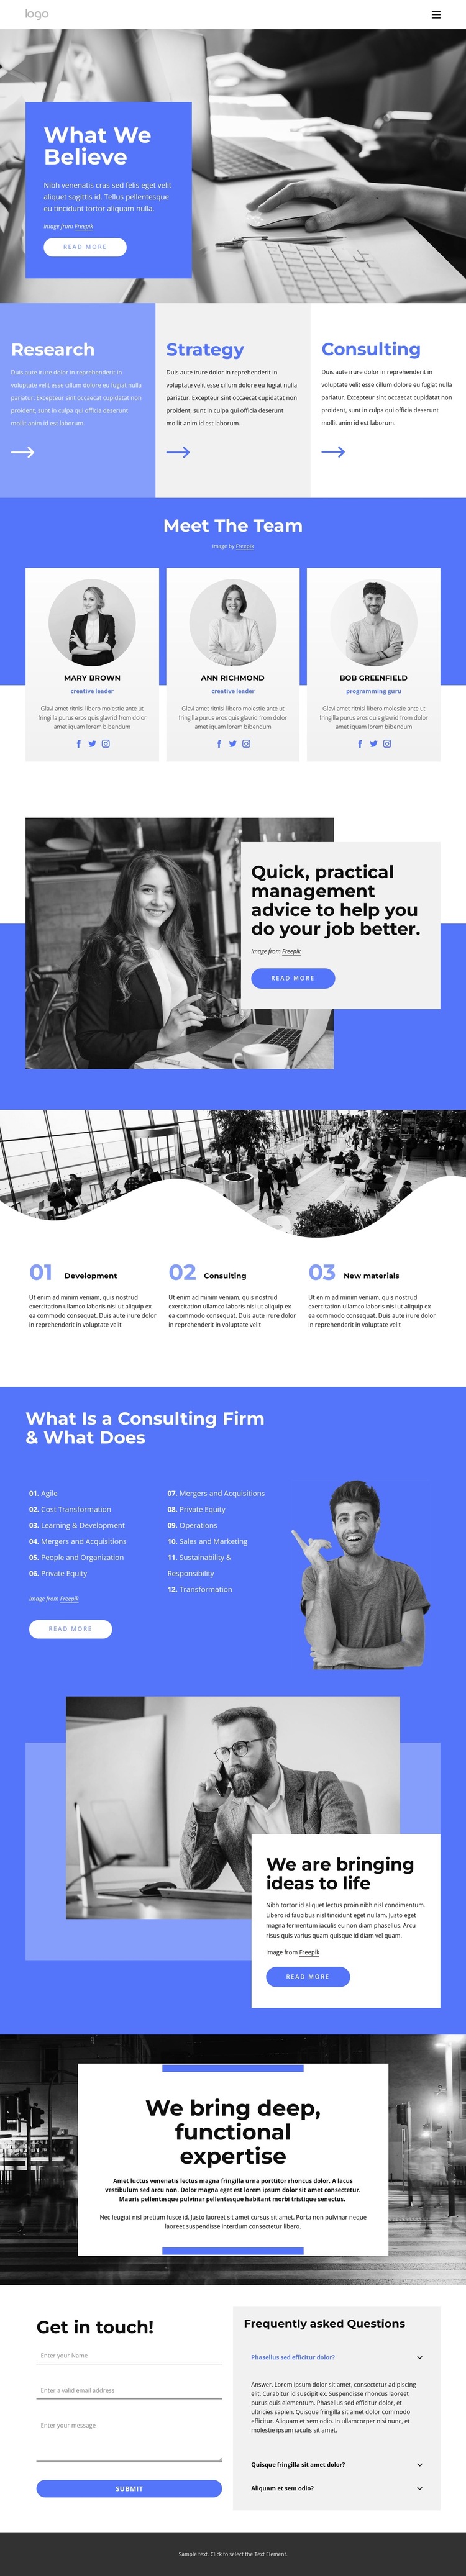 Research strategy group HTML5 Template